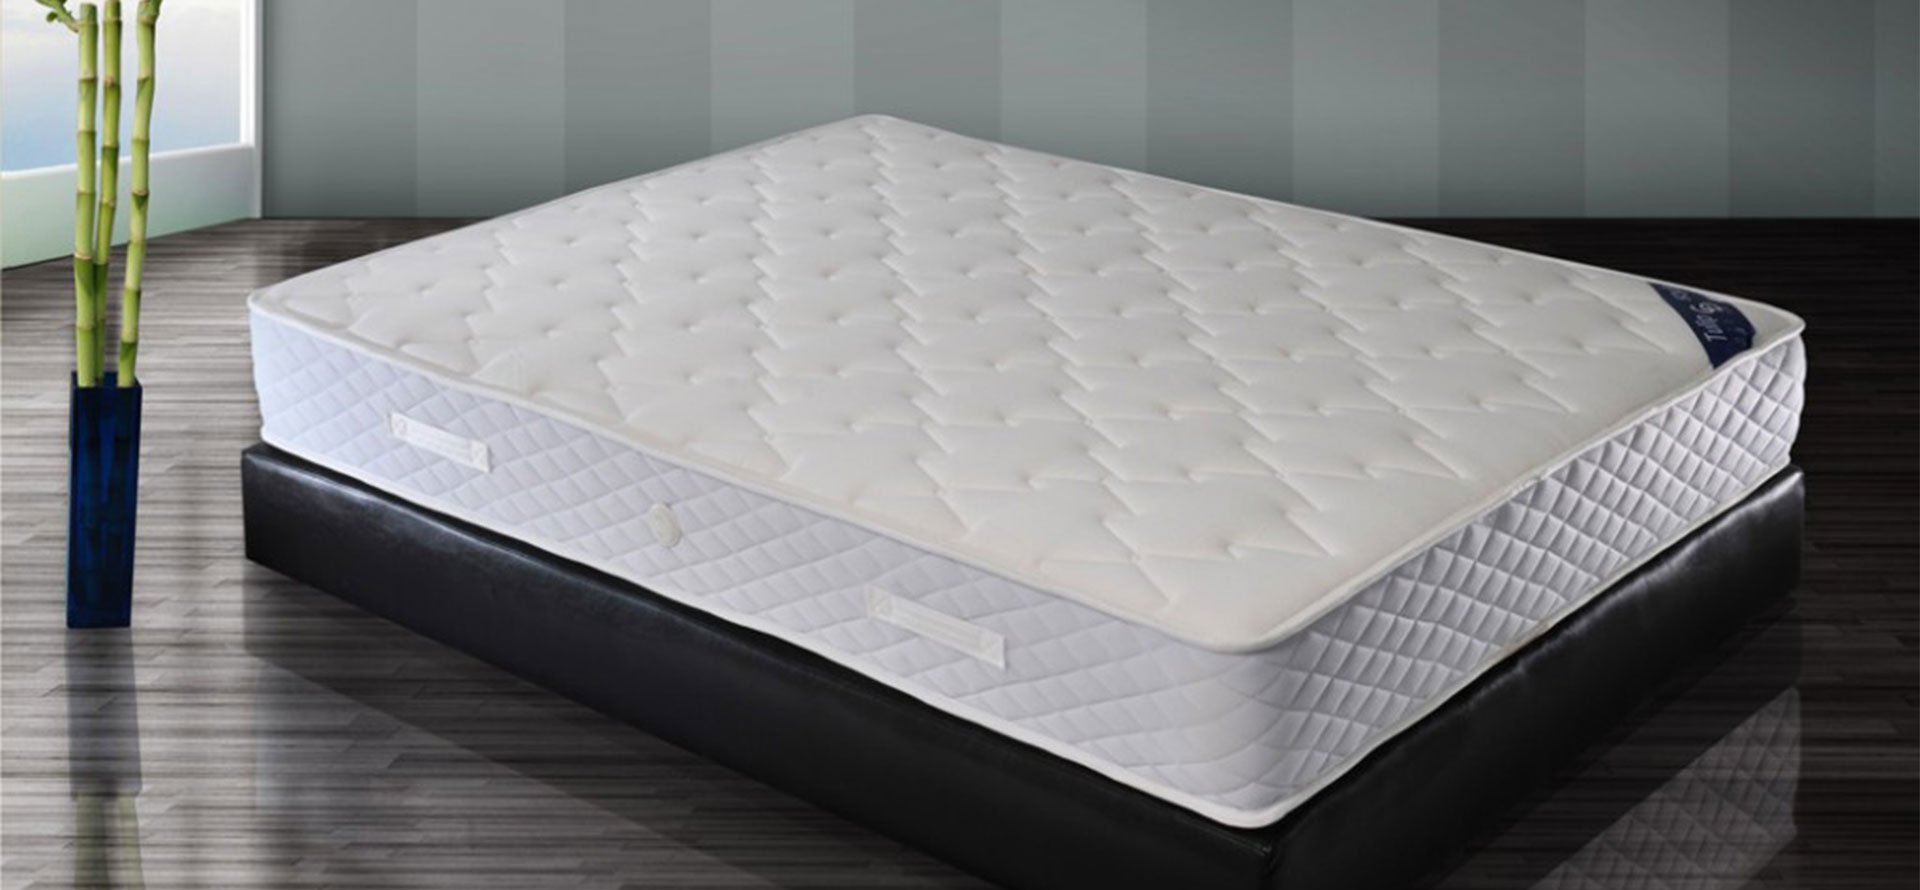 Difference between mattresses.